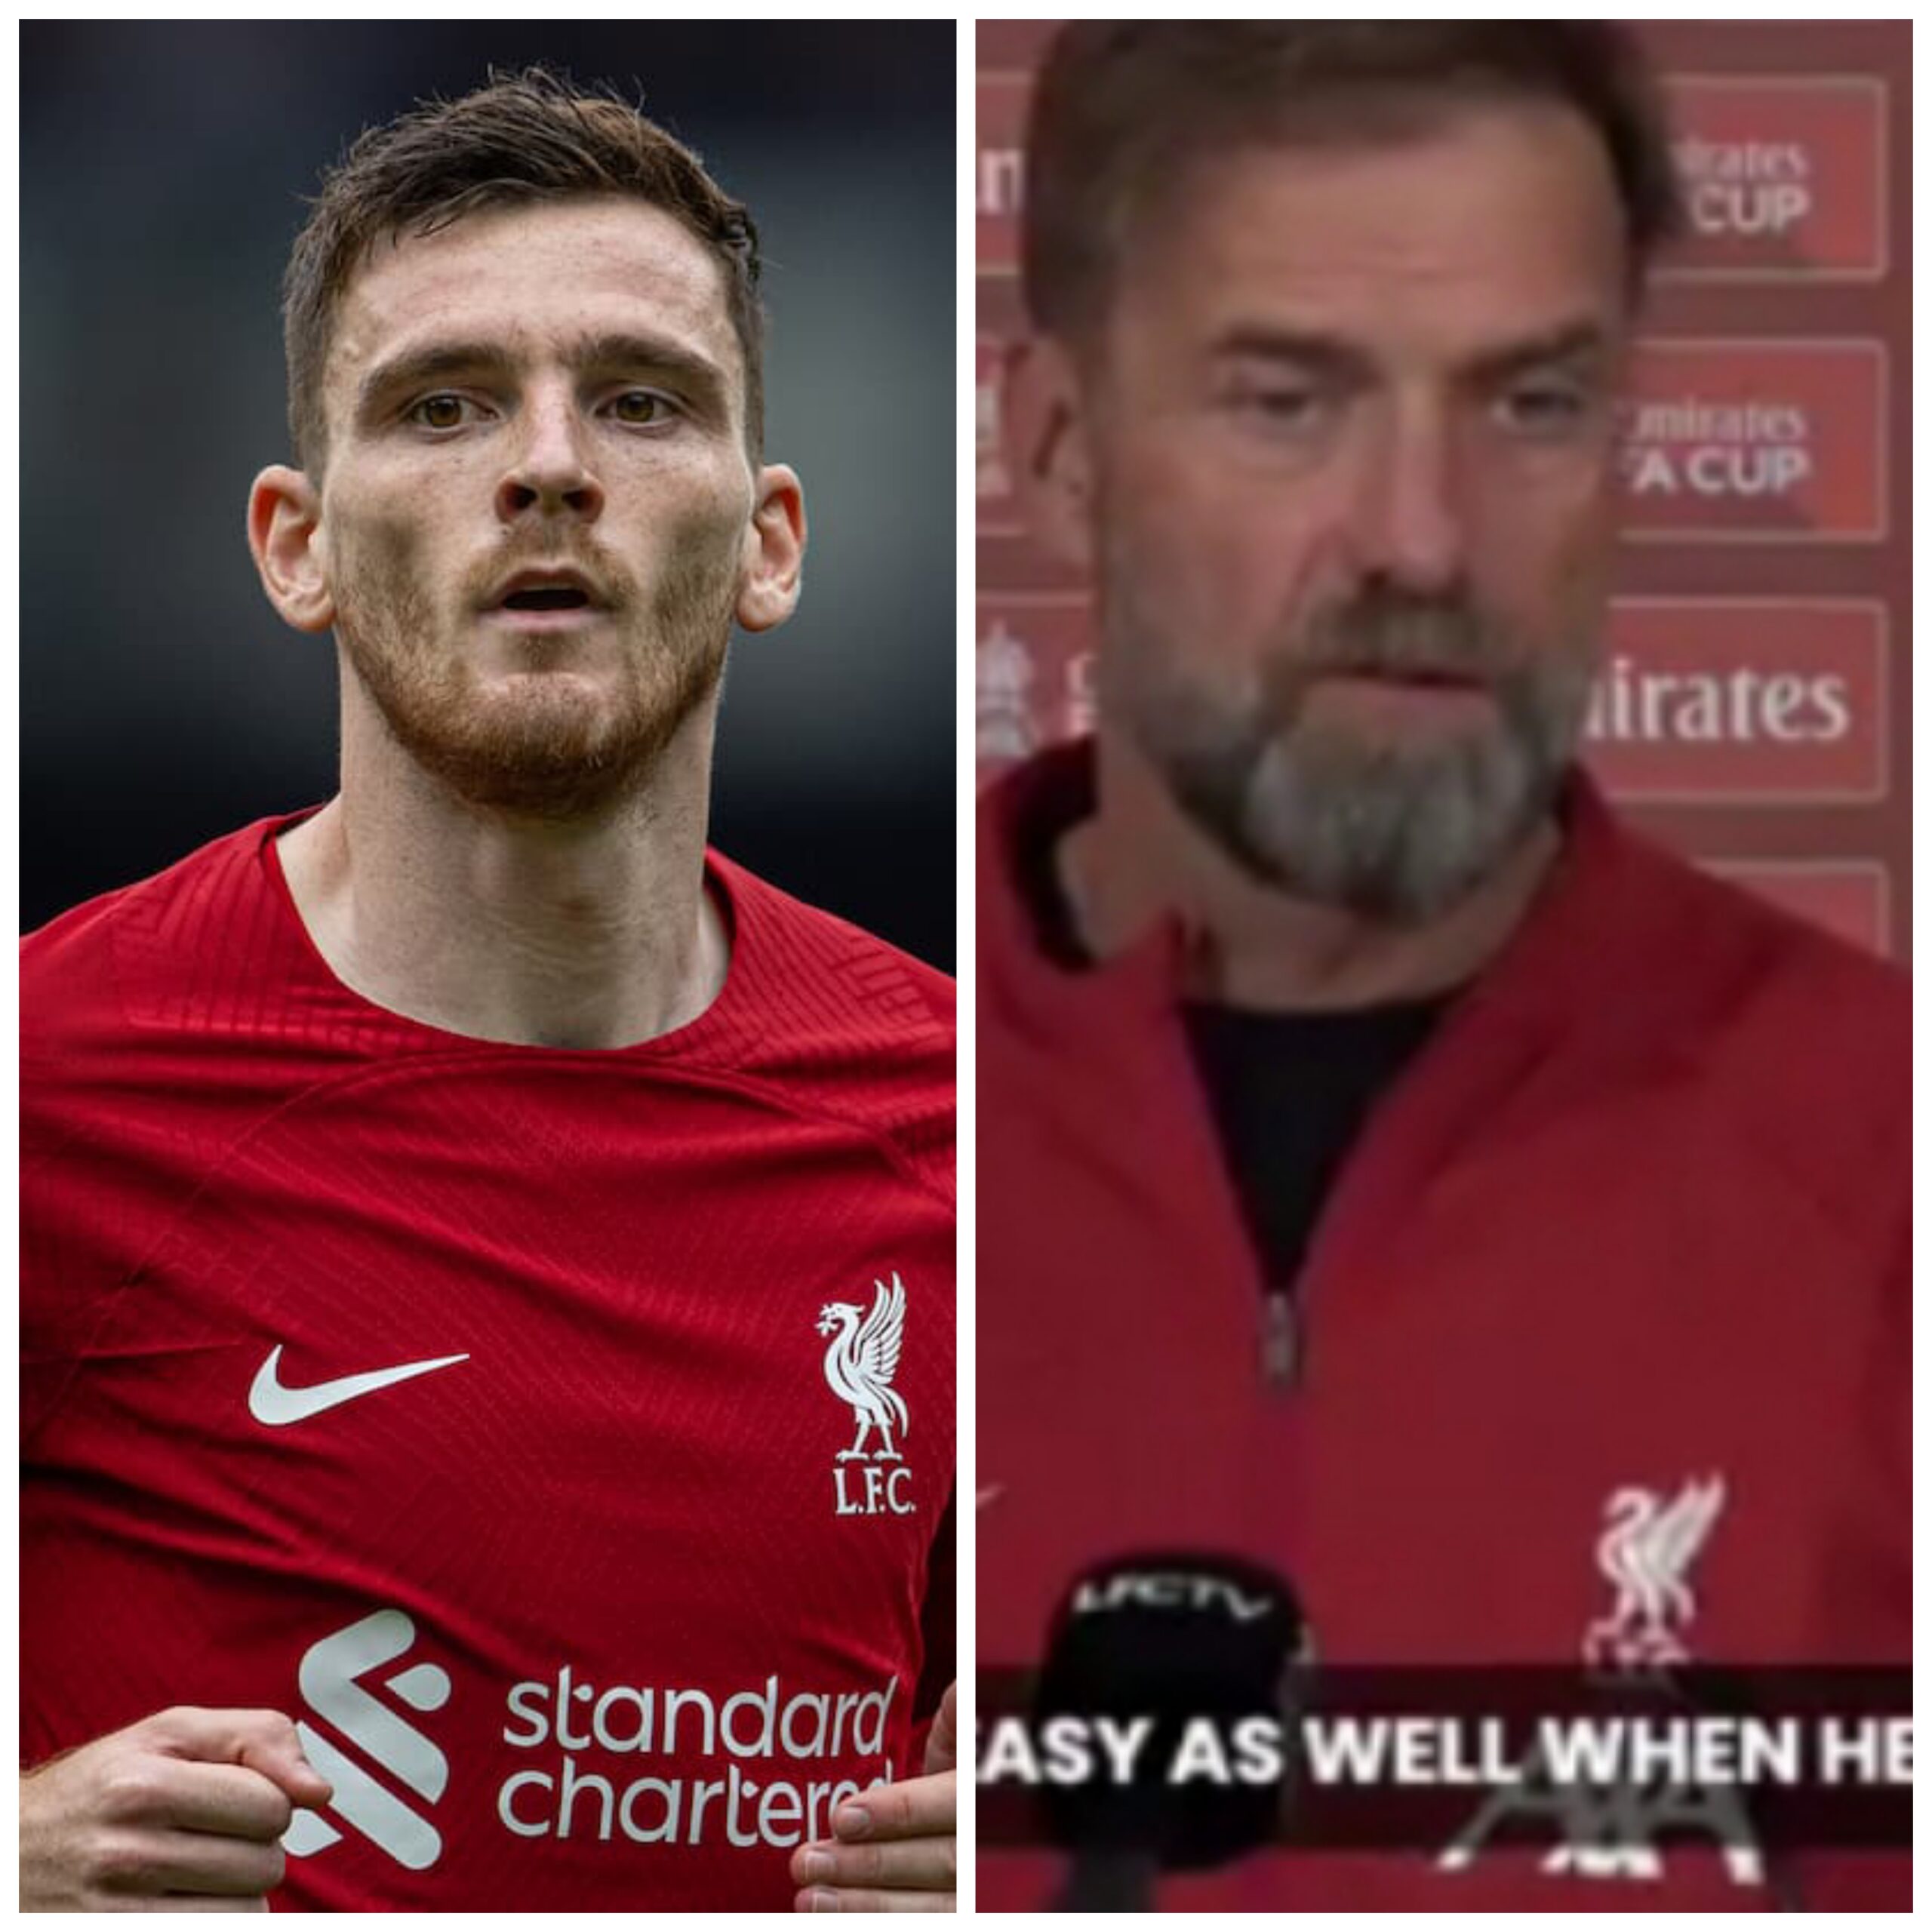 "Not True"-Jurgen Klopp reacts to Andy Robertson's blunt claim that Liverpool are getting worse 11 Sportelo